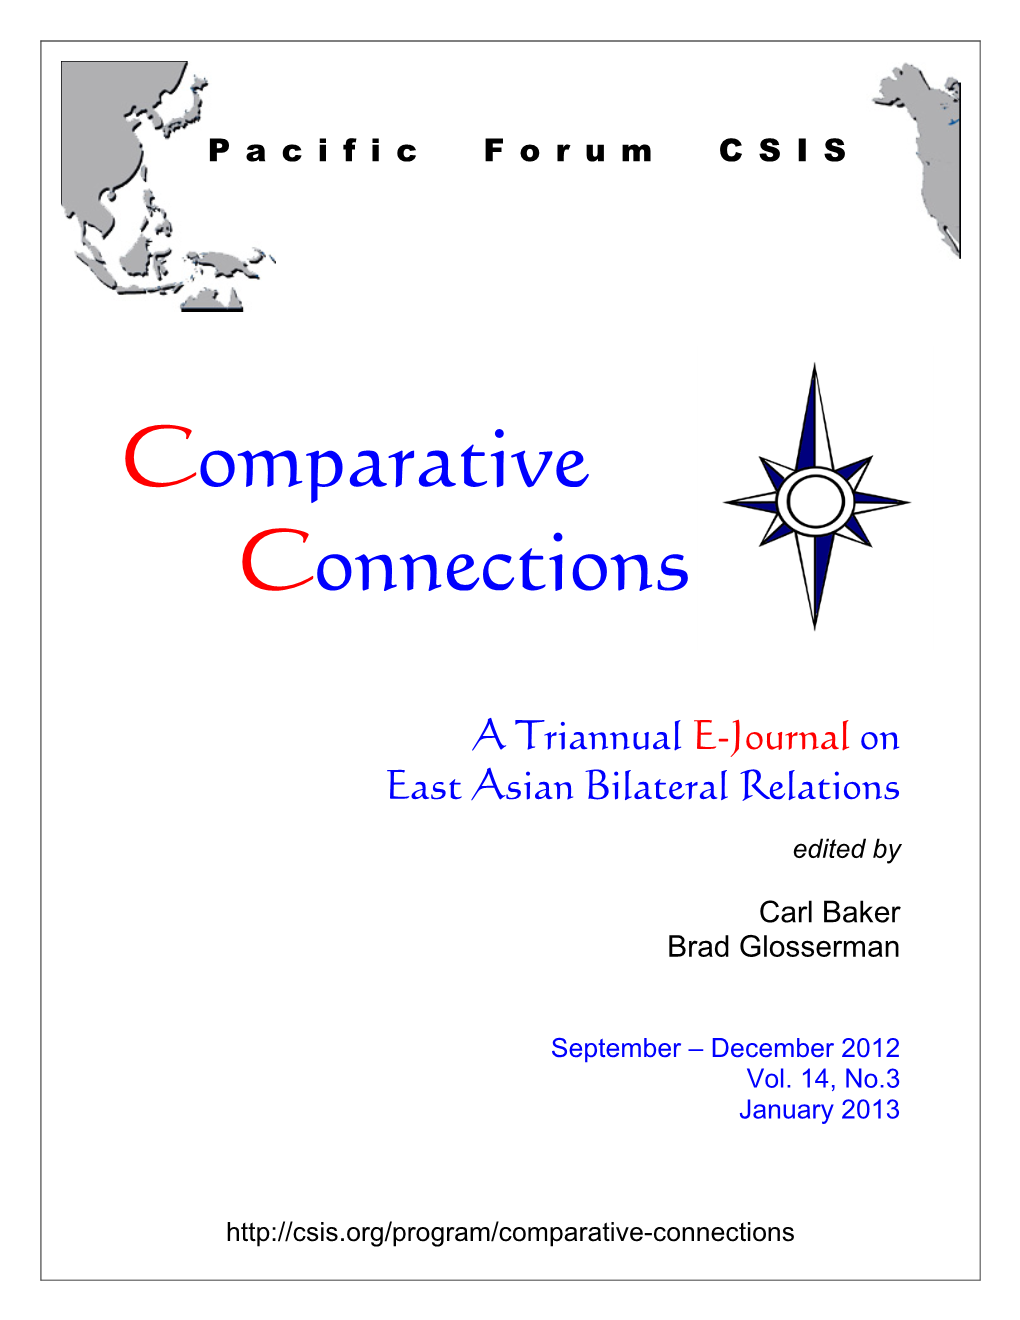 Comparative Connections, Volume 14, Number 3